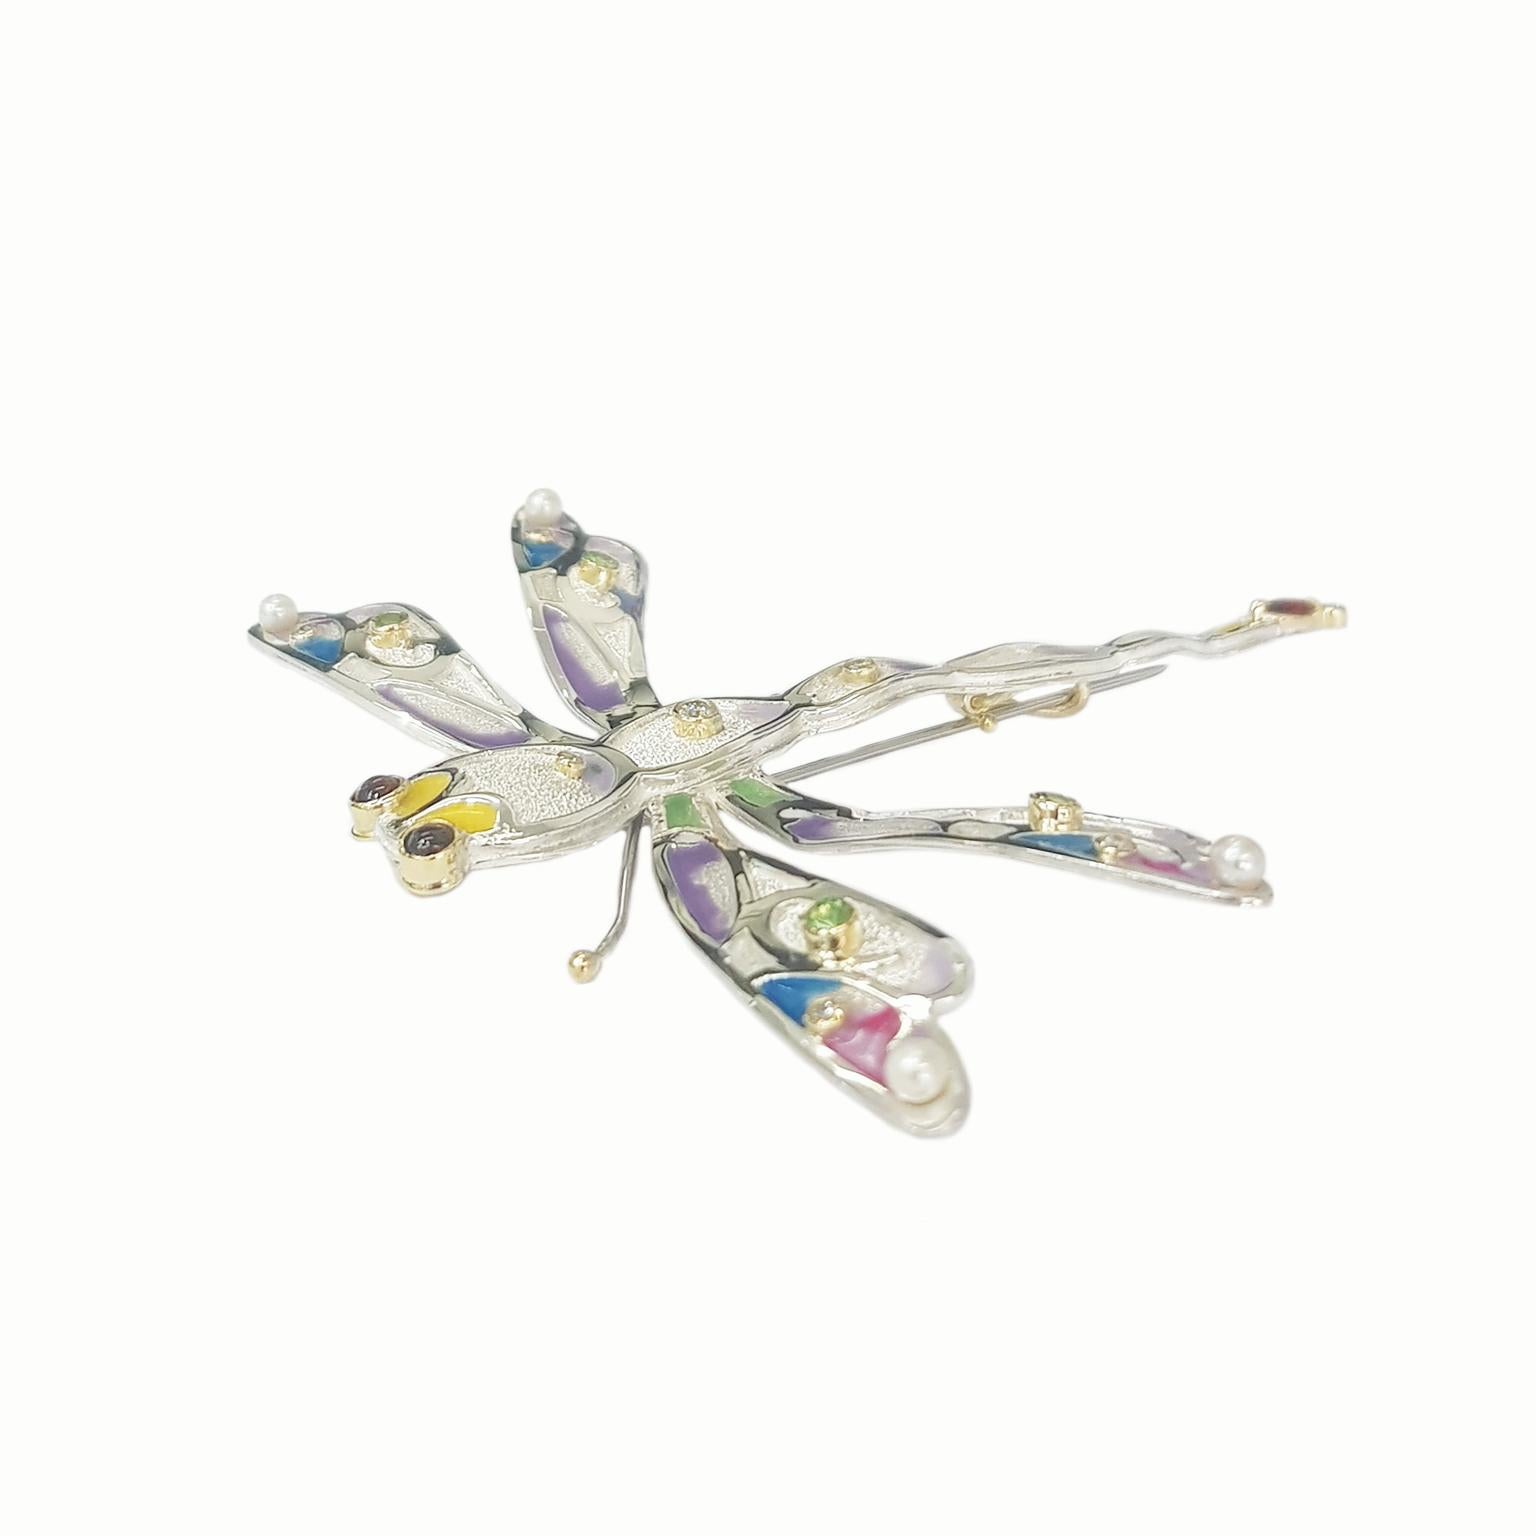 The Dragonfly Pendant-Brooch is a totally unique and completely handcrafted and created by Paul Amey.  The Dragonfly Pendant-Brooch was crafted from tarnish resistant Sterling Silver with diamonds, garnets, tsavorite garnets and pearls scattered